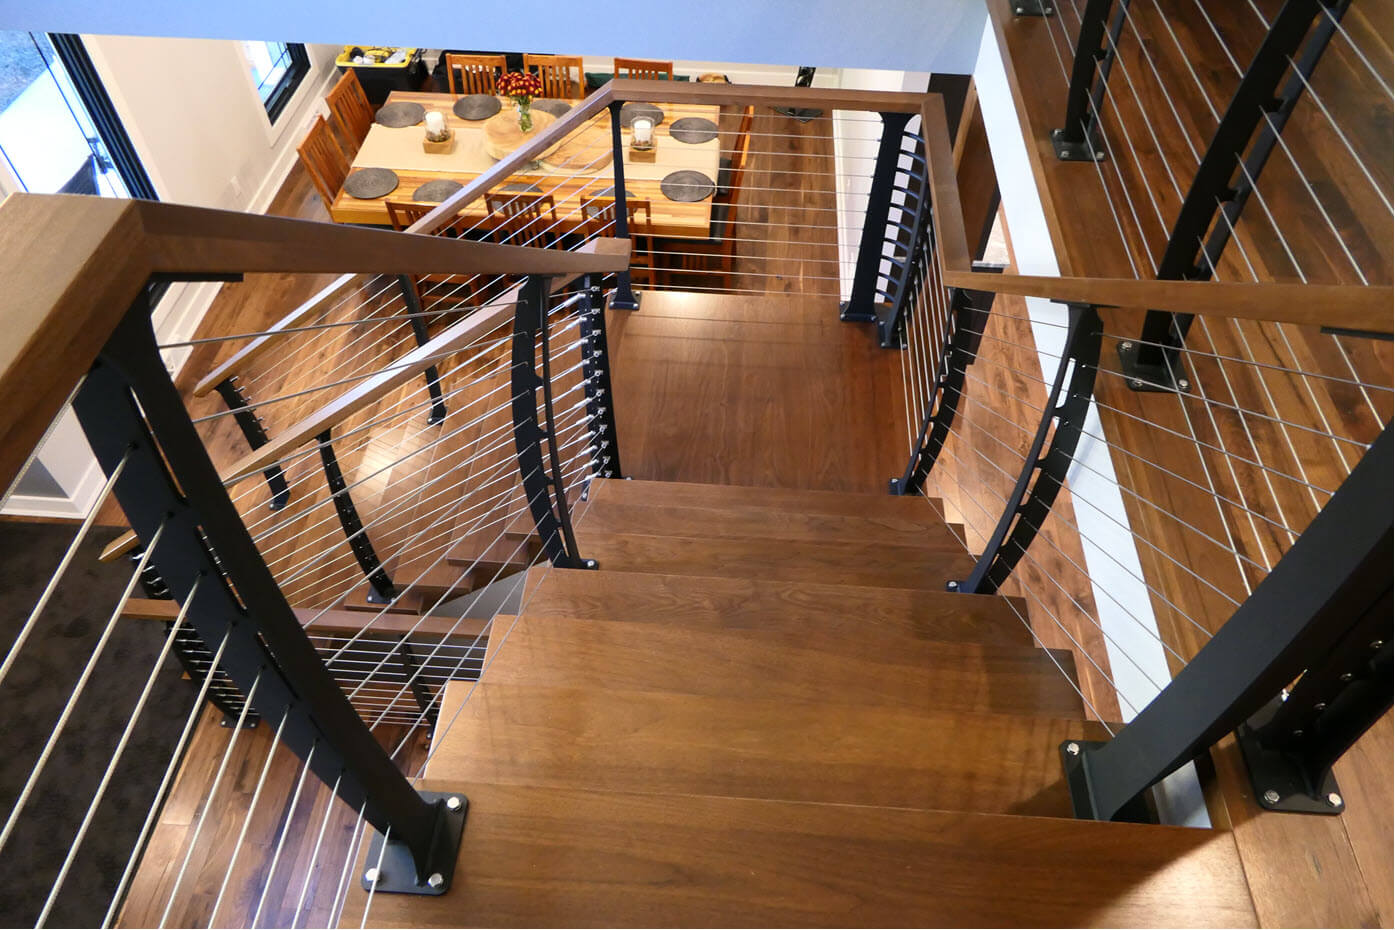 Curved cable railing system on center staircaase